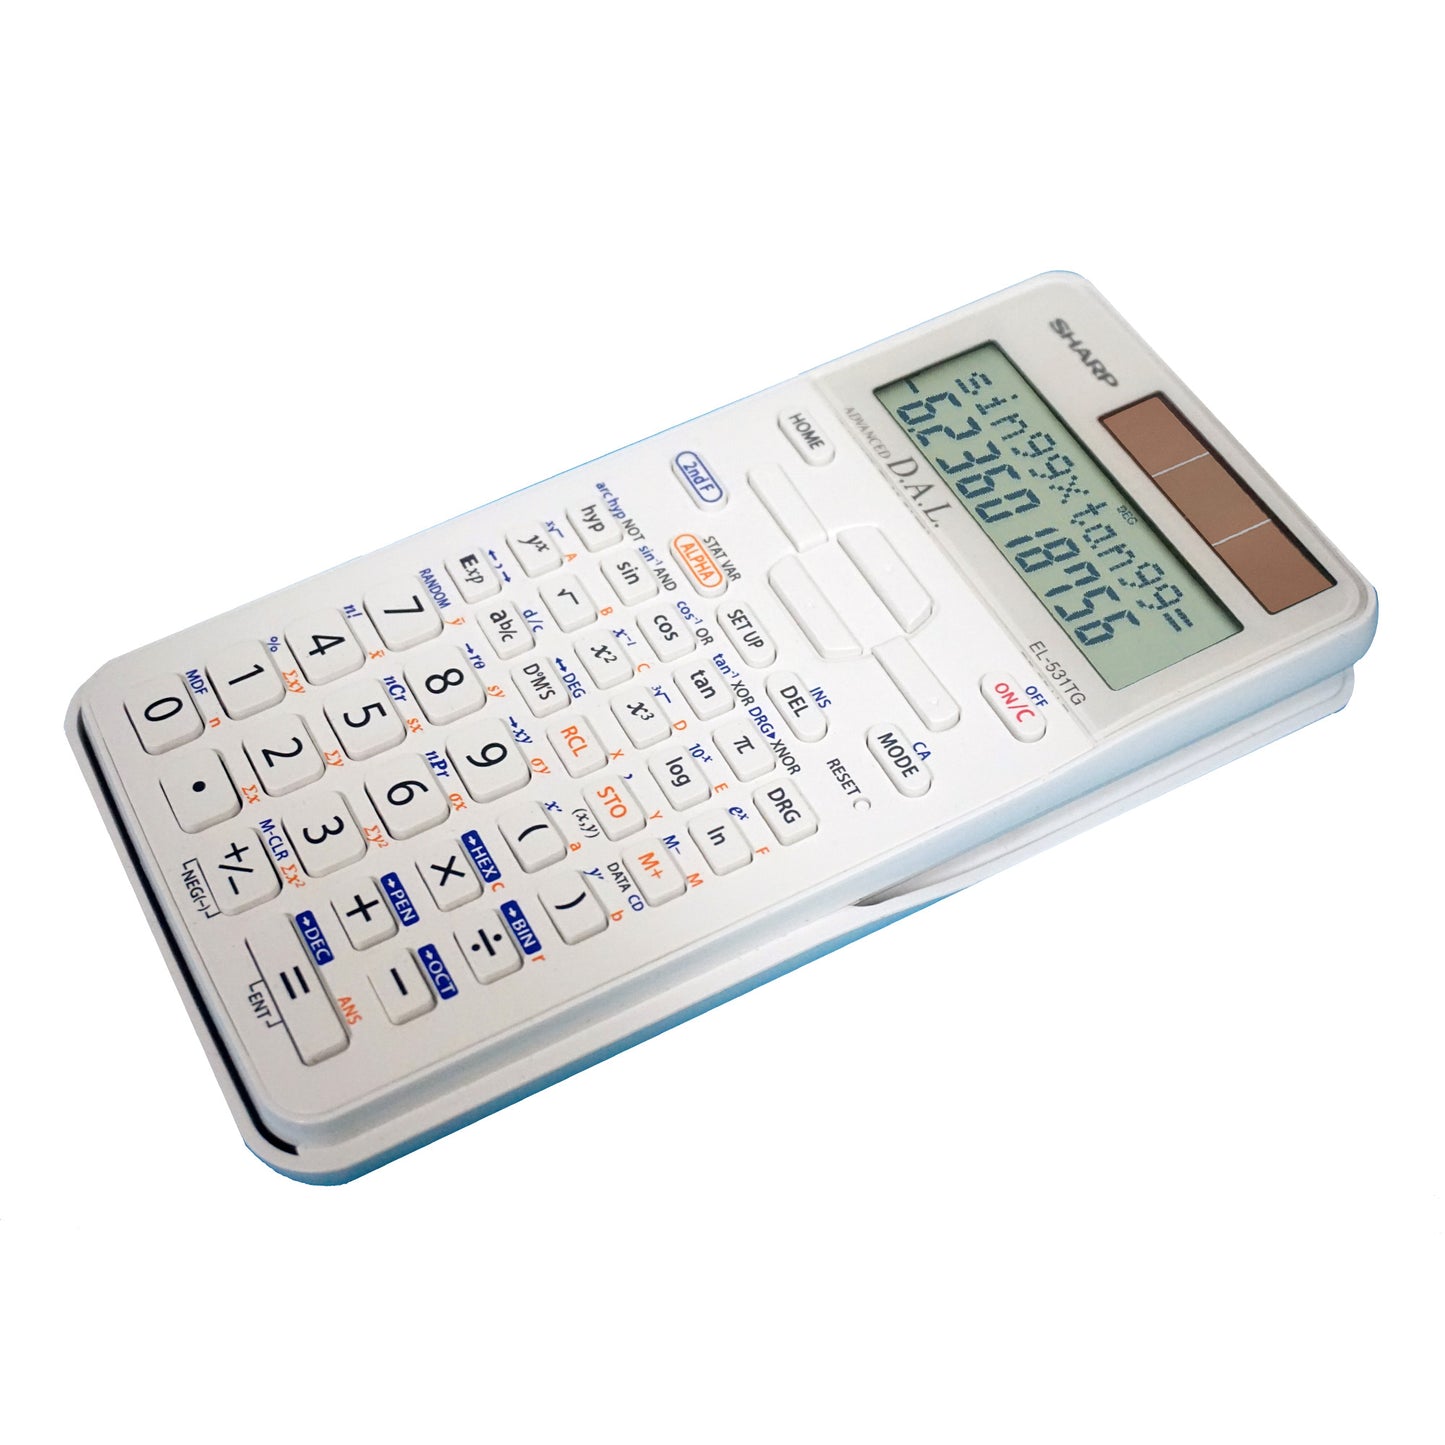 black scientific calculator with blue accents and hard cover sliding case